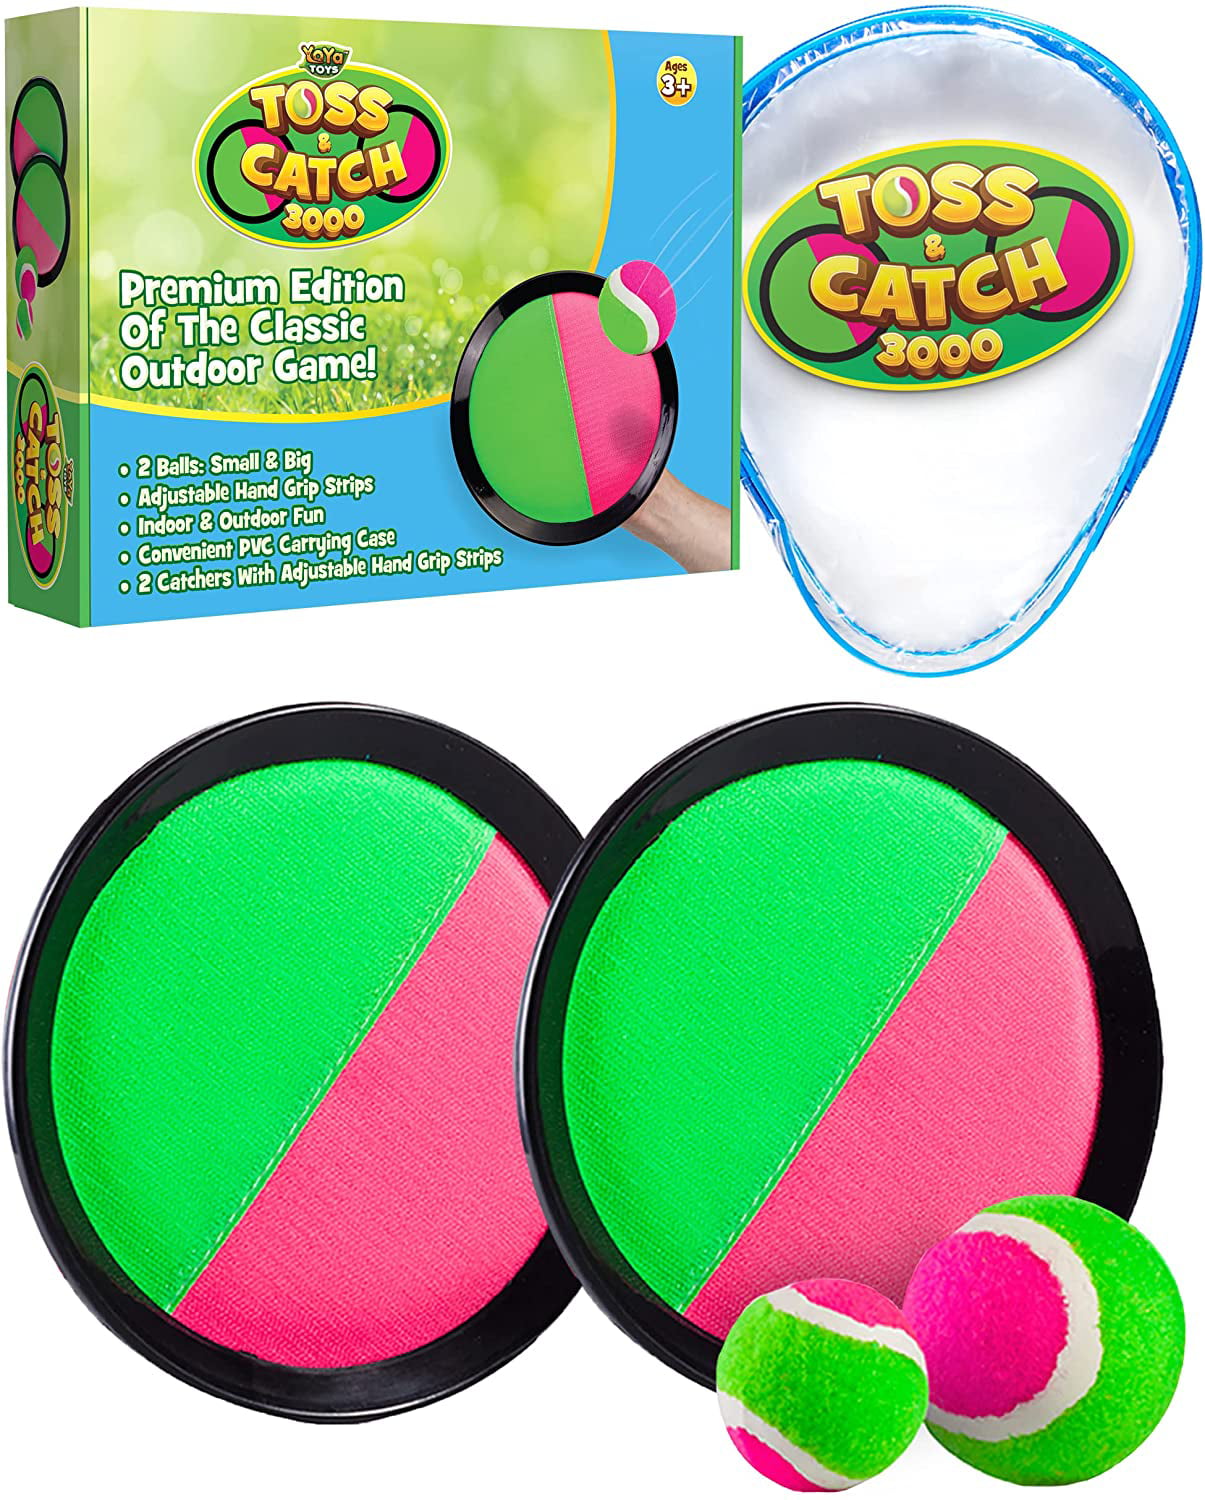 Toys Toss & Catch 3000 Ball Game With Disc Paddles 2 Balls Yoya Big and Velcro for sale online 